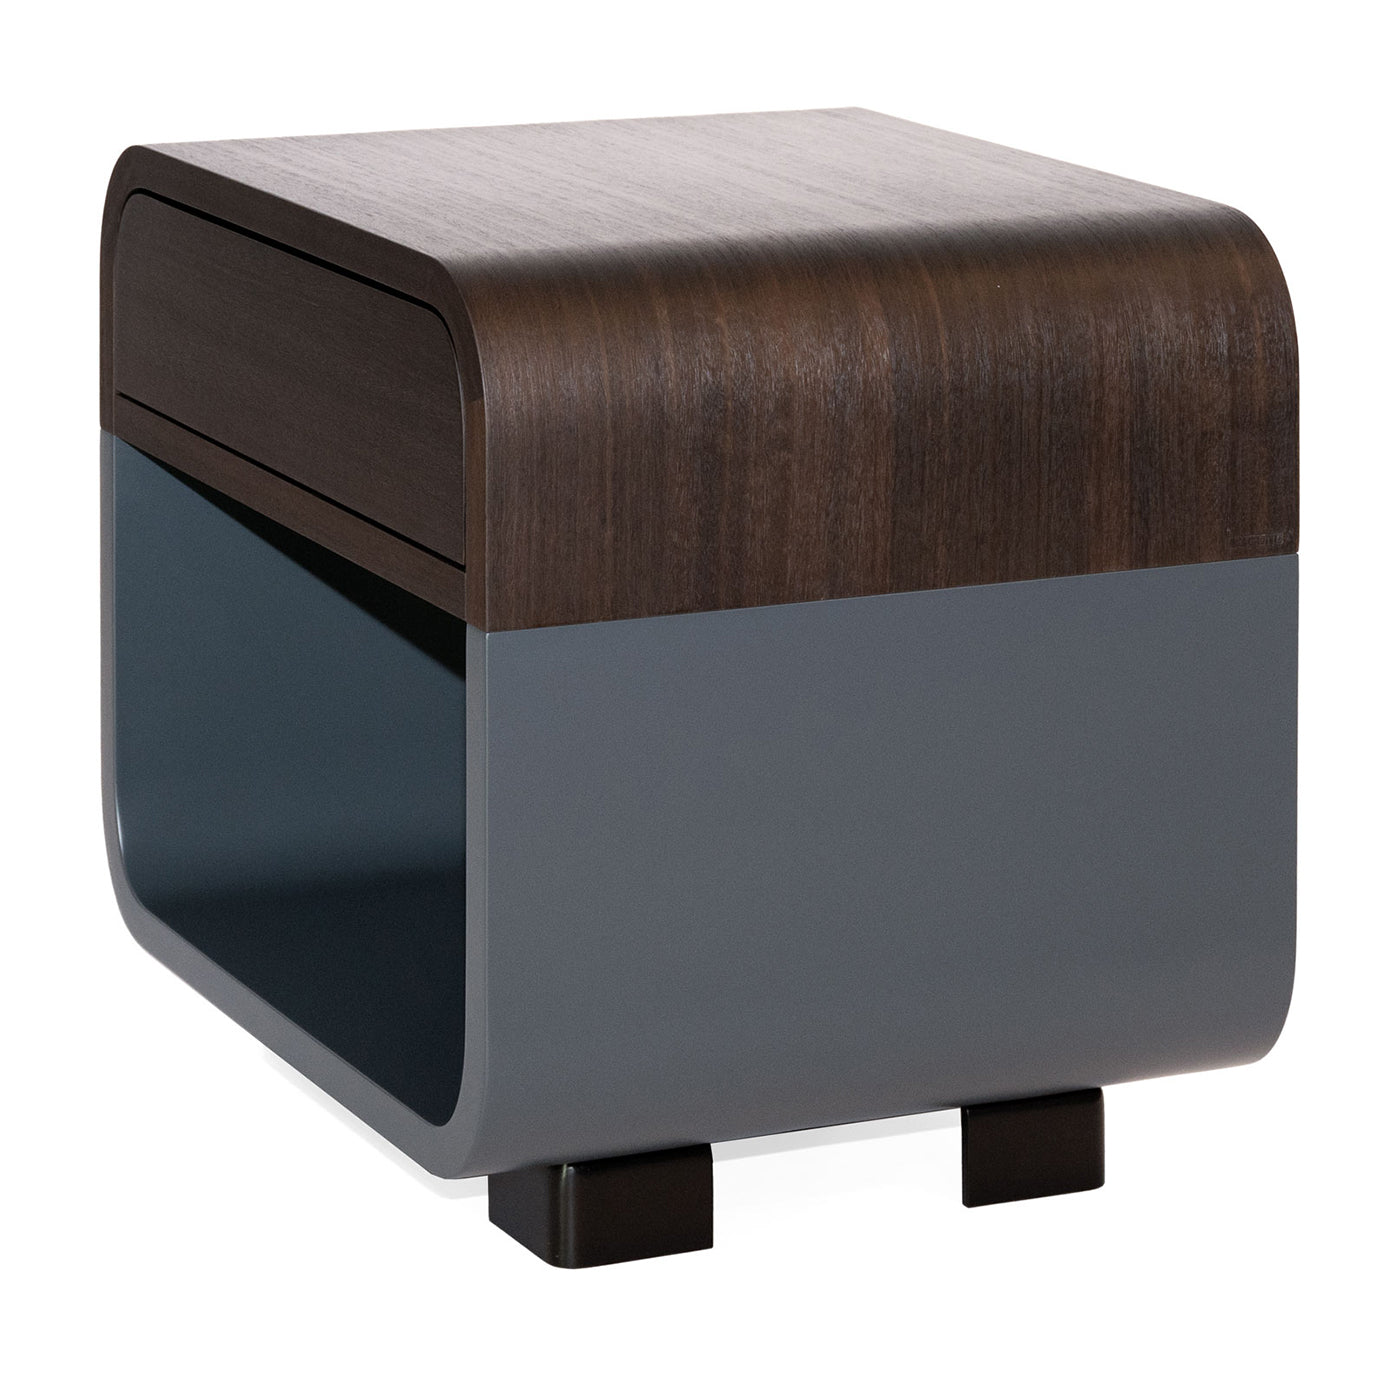 Tabaco Brown Nightstand  - Alternative view 2